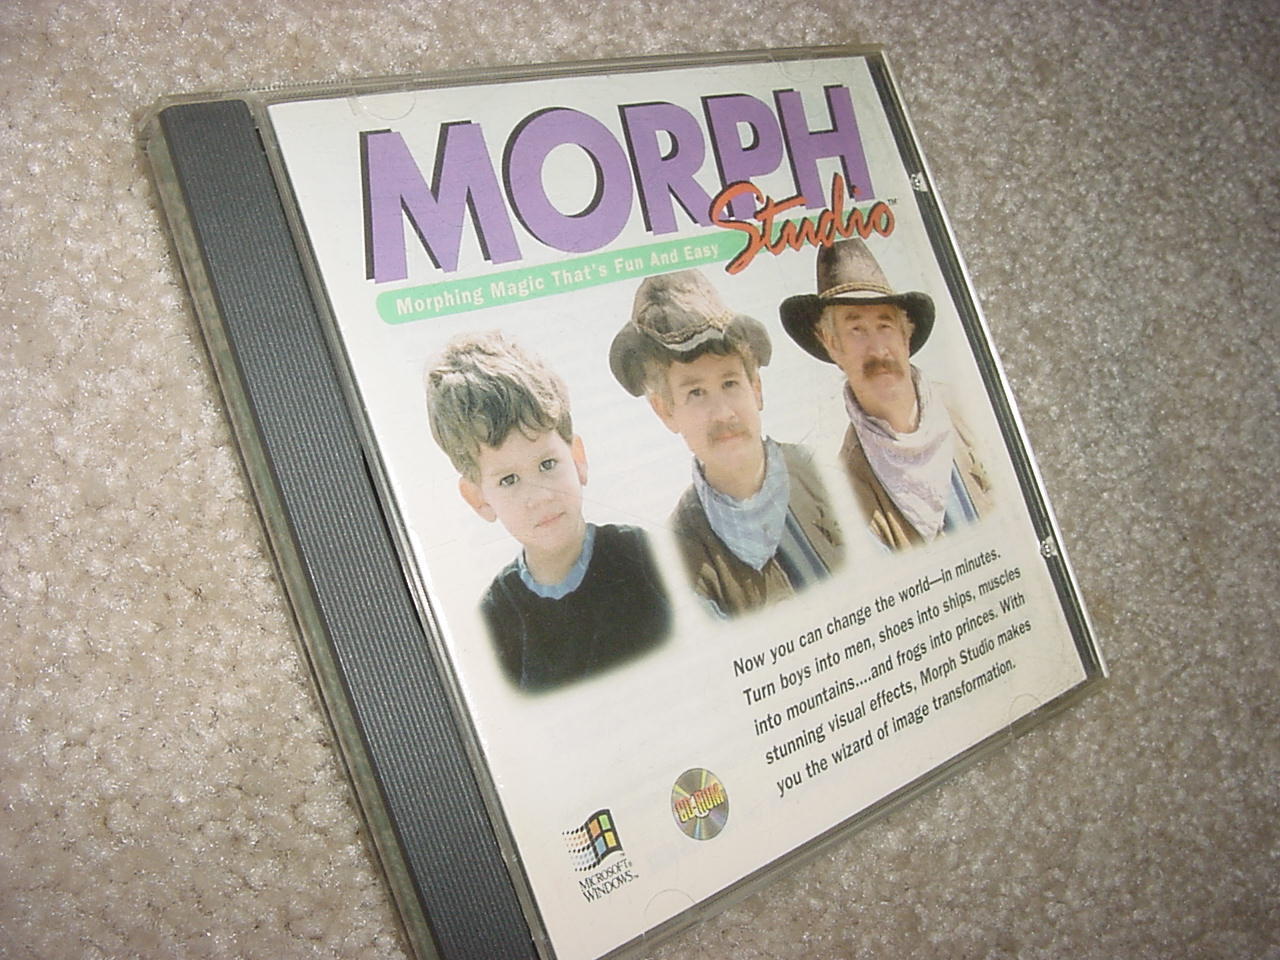 MORPH STUDIO  by SOFTKEY Special Effects  CD-ROM - 1995